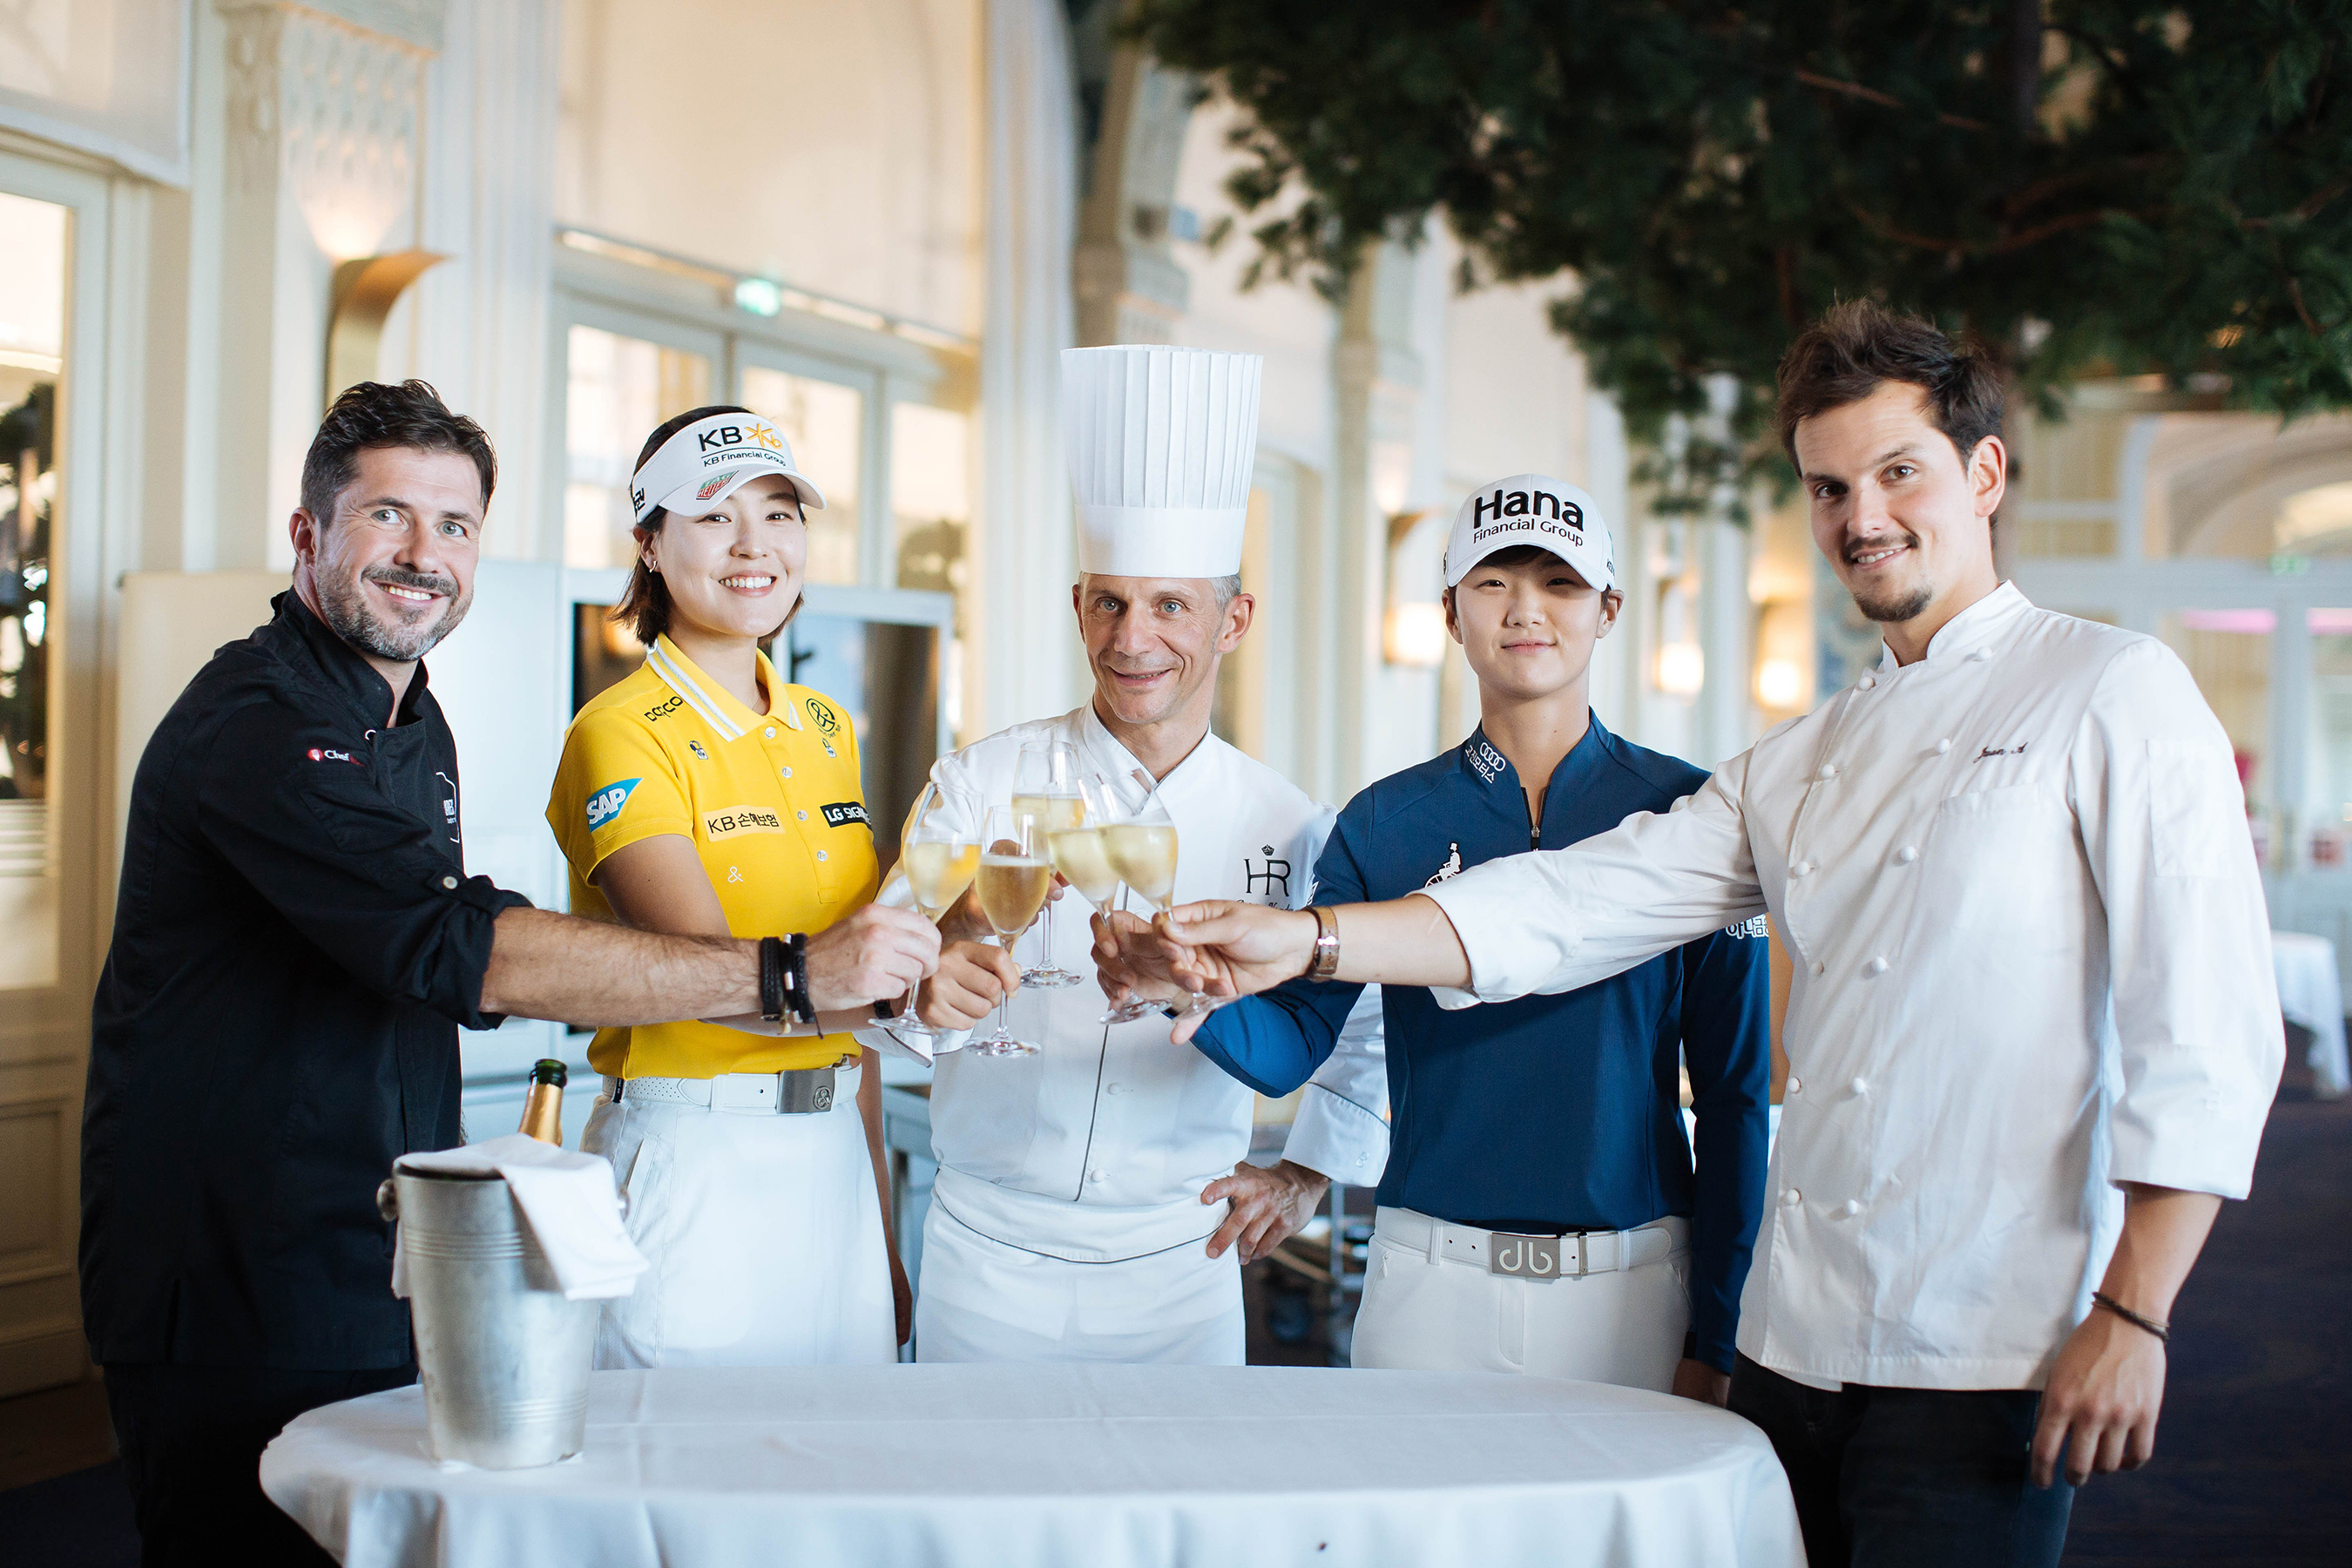 Chefs Patrice Vander, Christopher Crell and Juan Arbelaez with two leading golfers Park Sung-hyun and Chun In-gee Lewis Joly